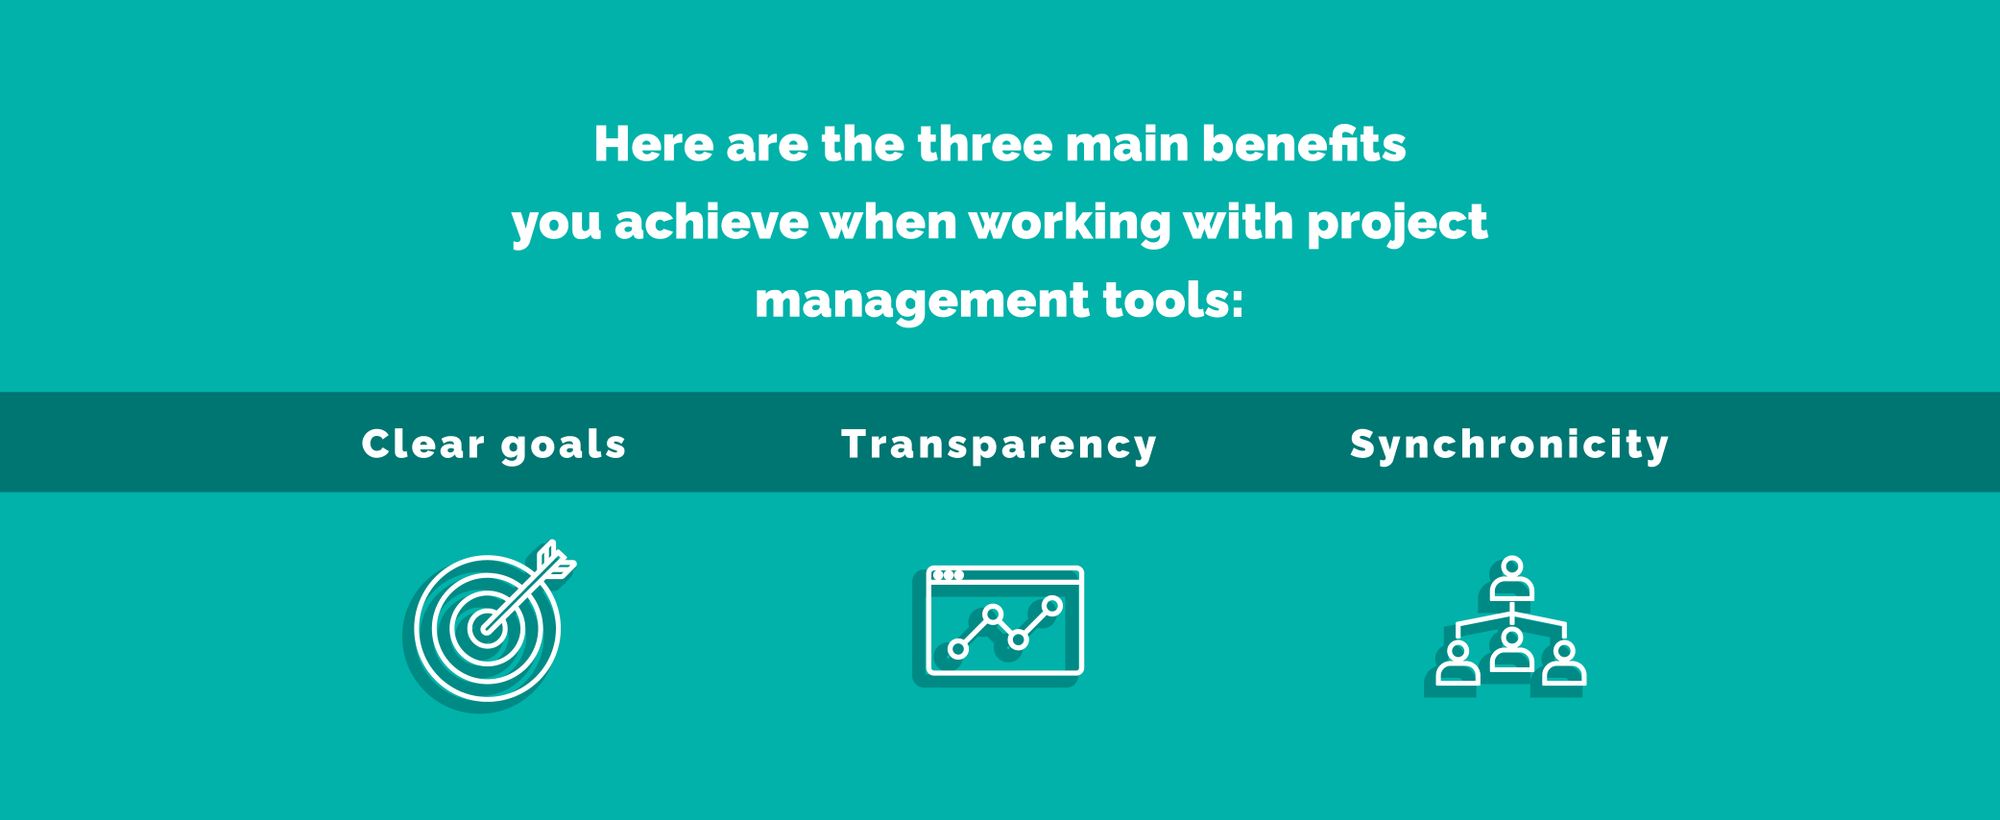 benefits of project management tools